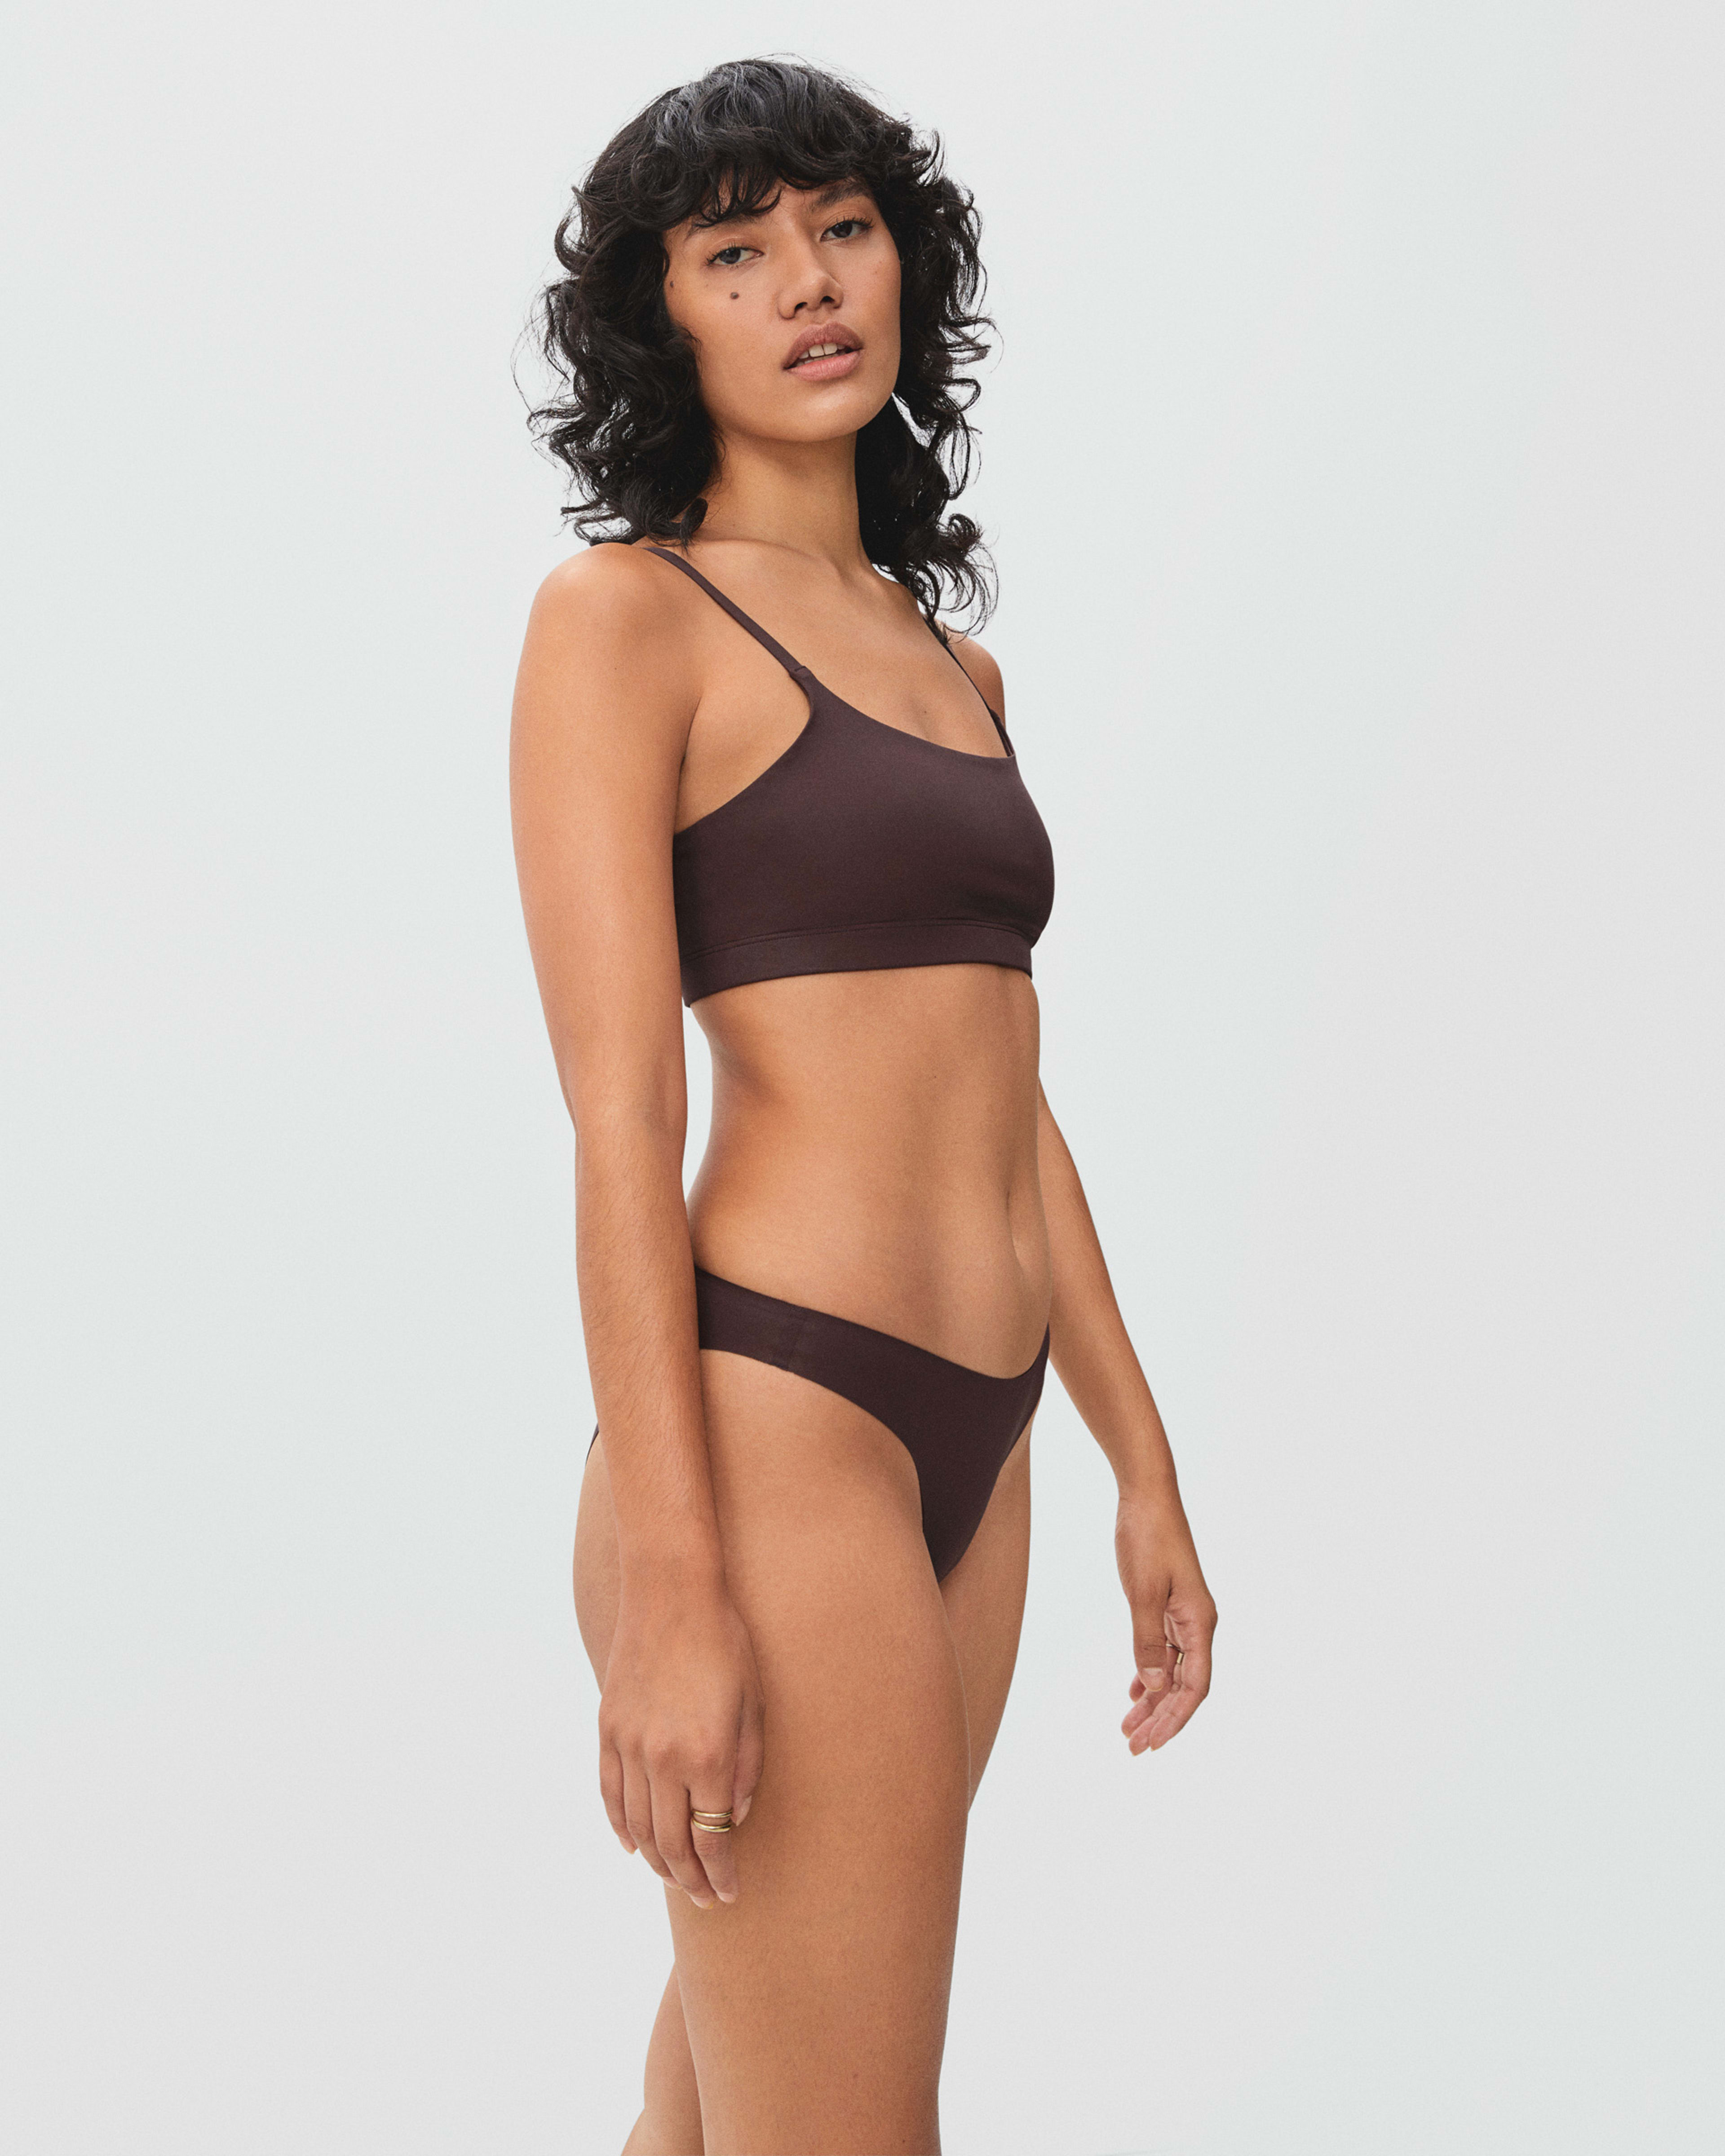 Women's Invisible Intimates in Tan